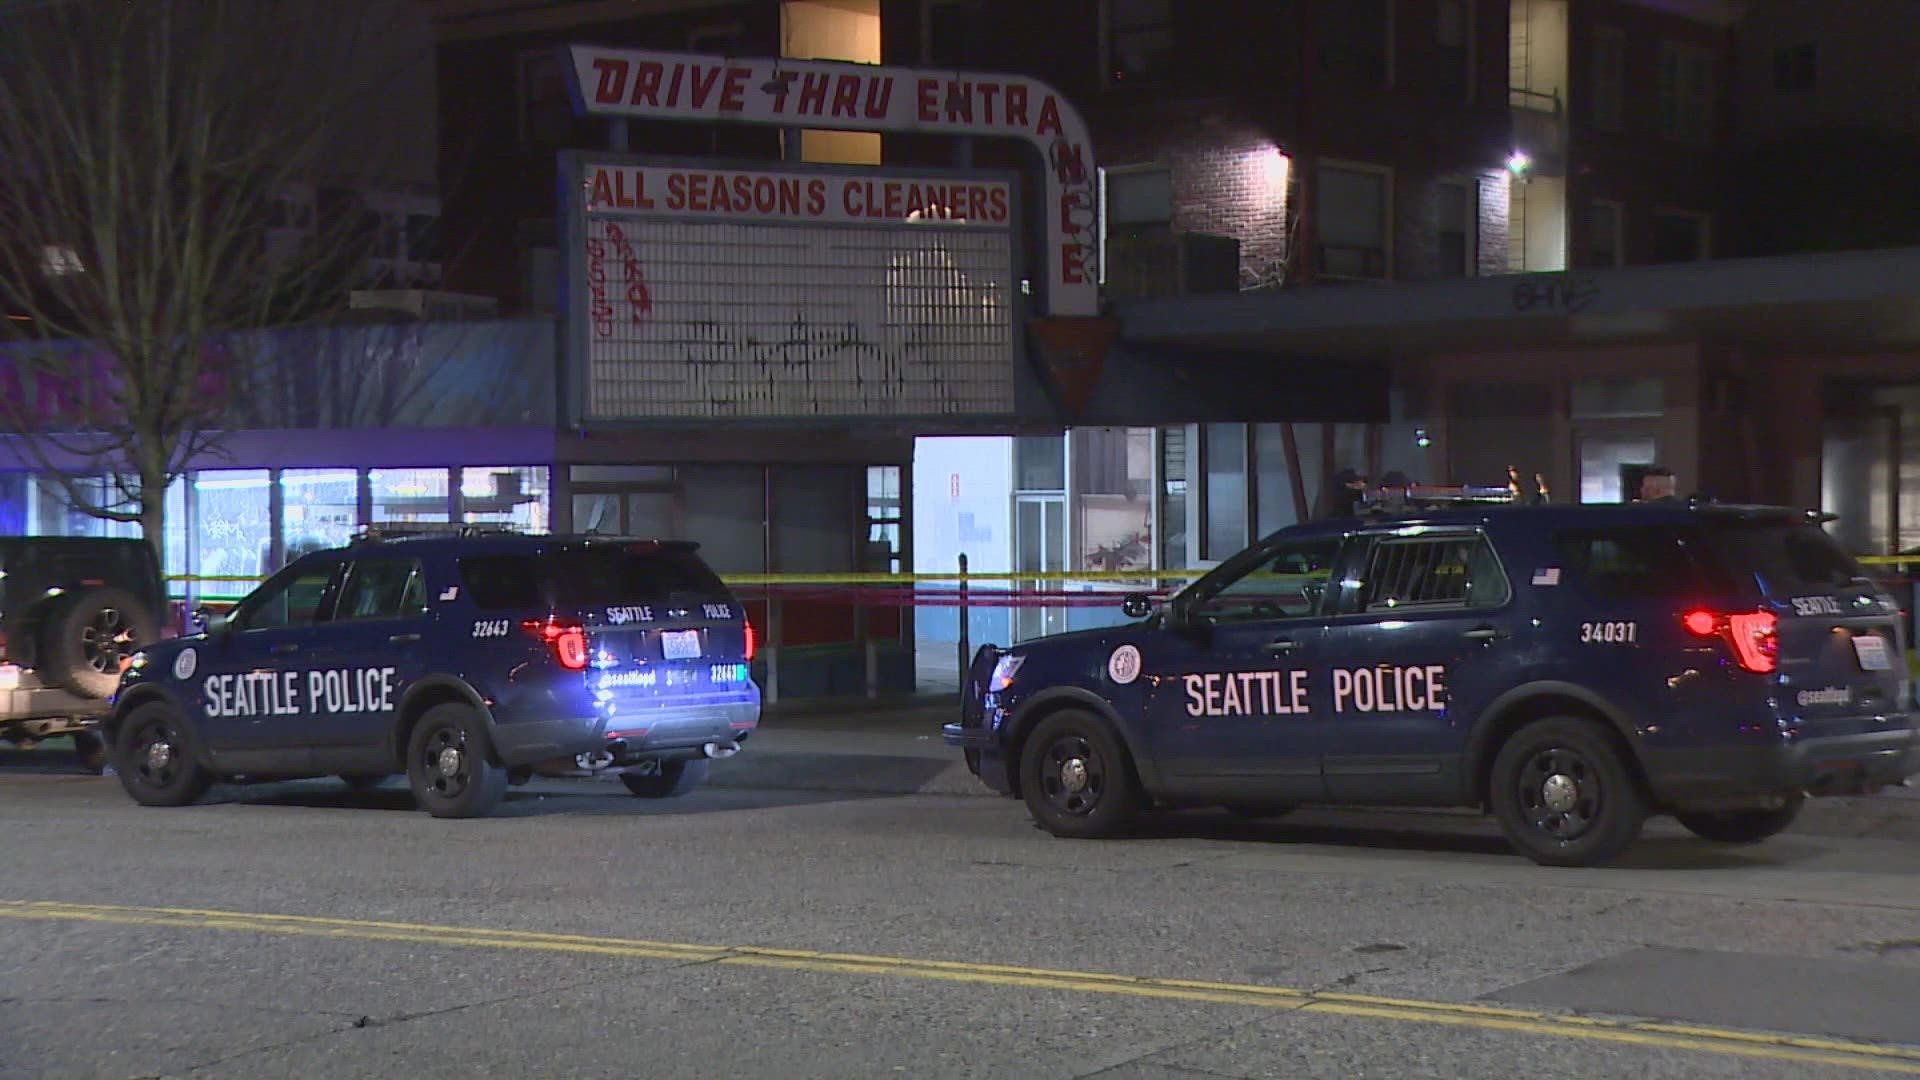 Two deaths occurred within five hours in Seattle early Thursday morning